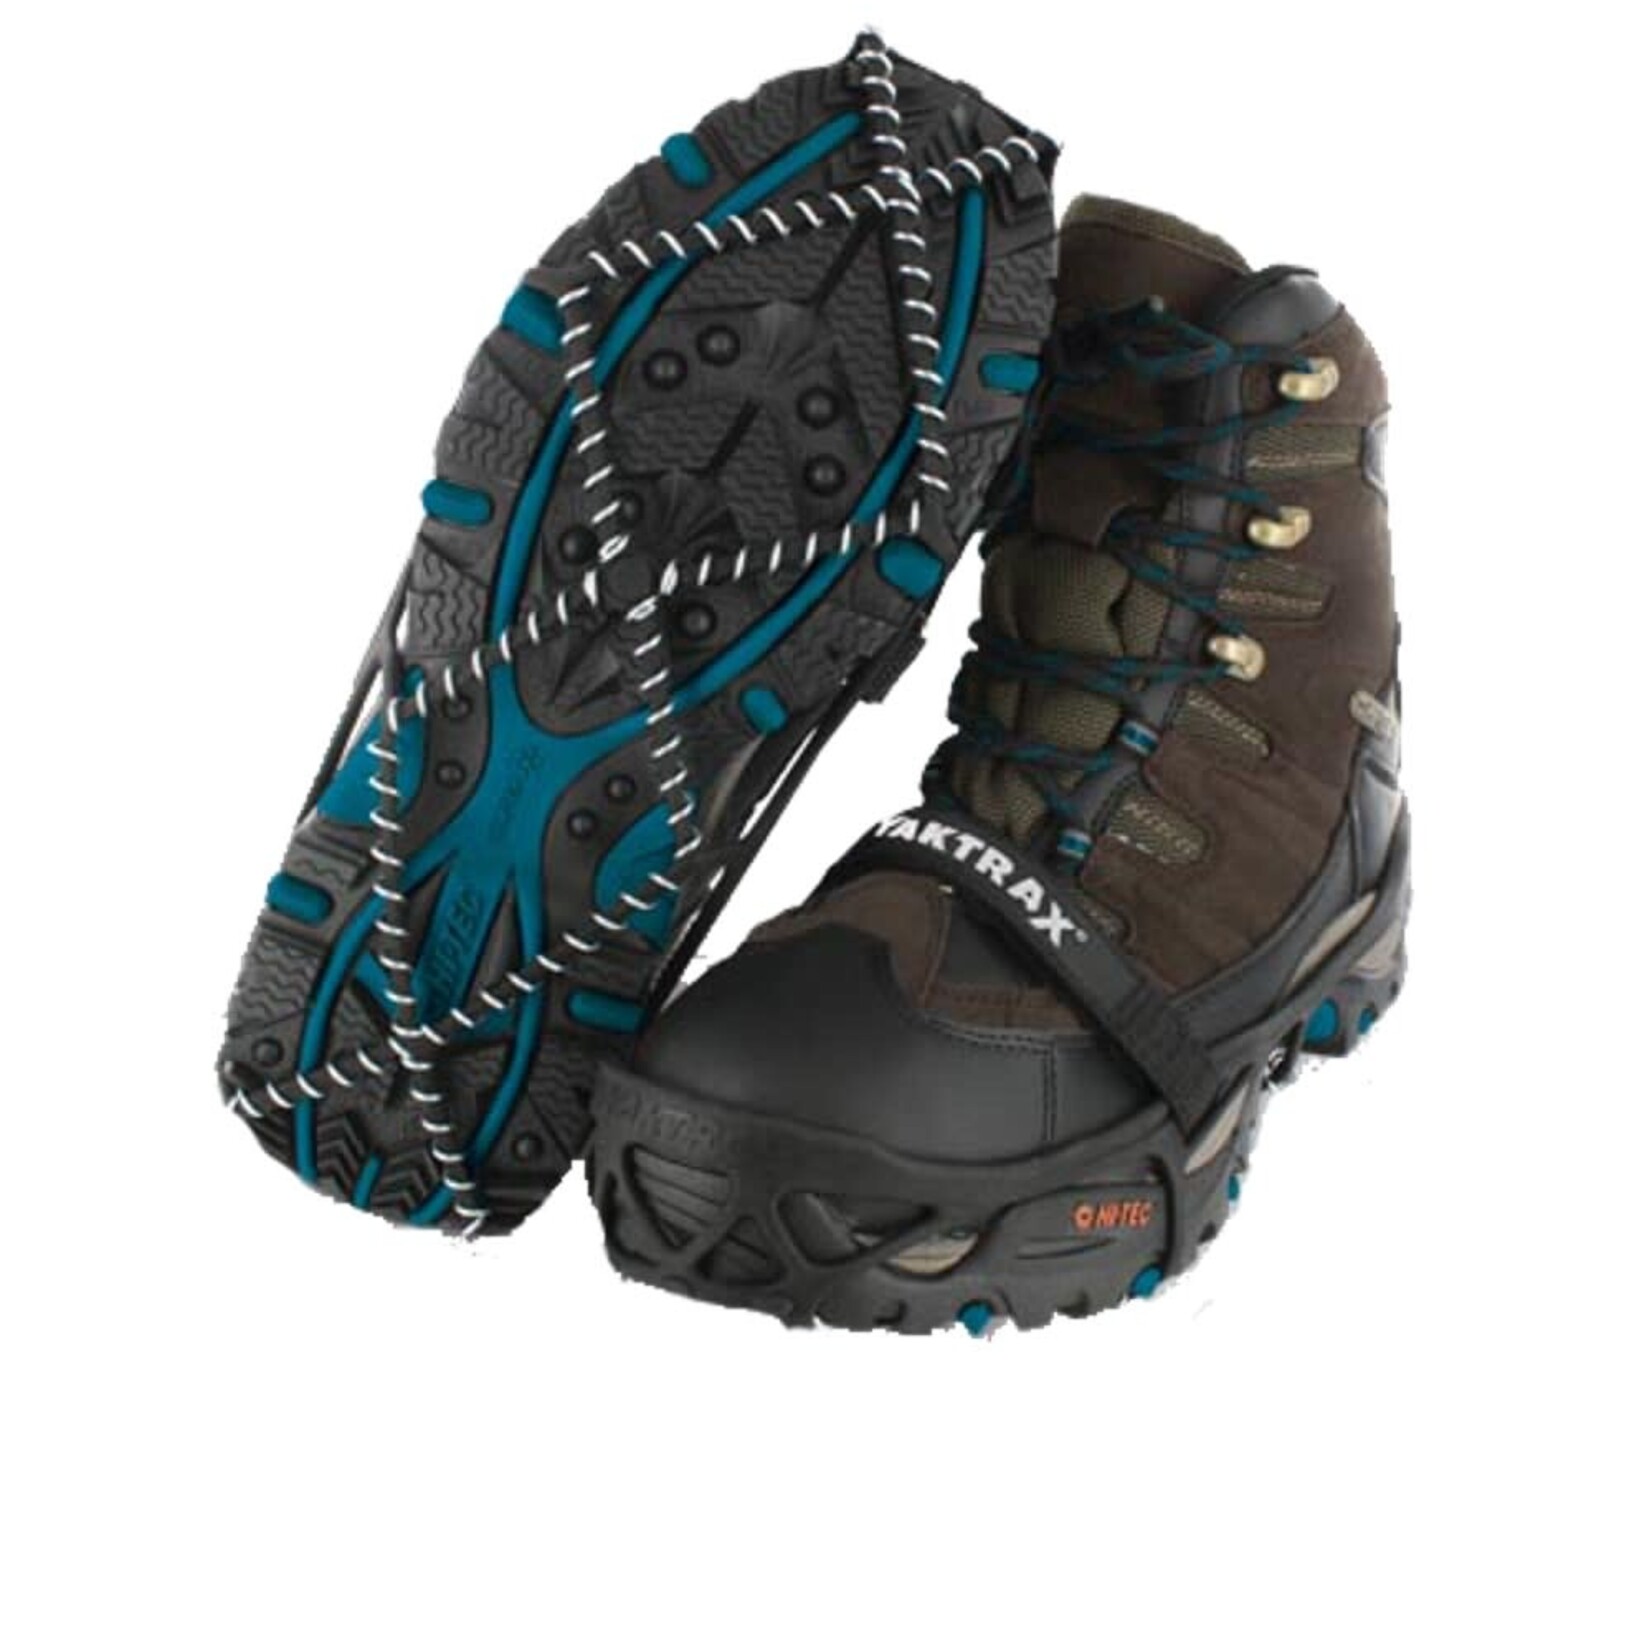 YakTrax Pro Traction Device (pair)